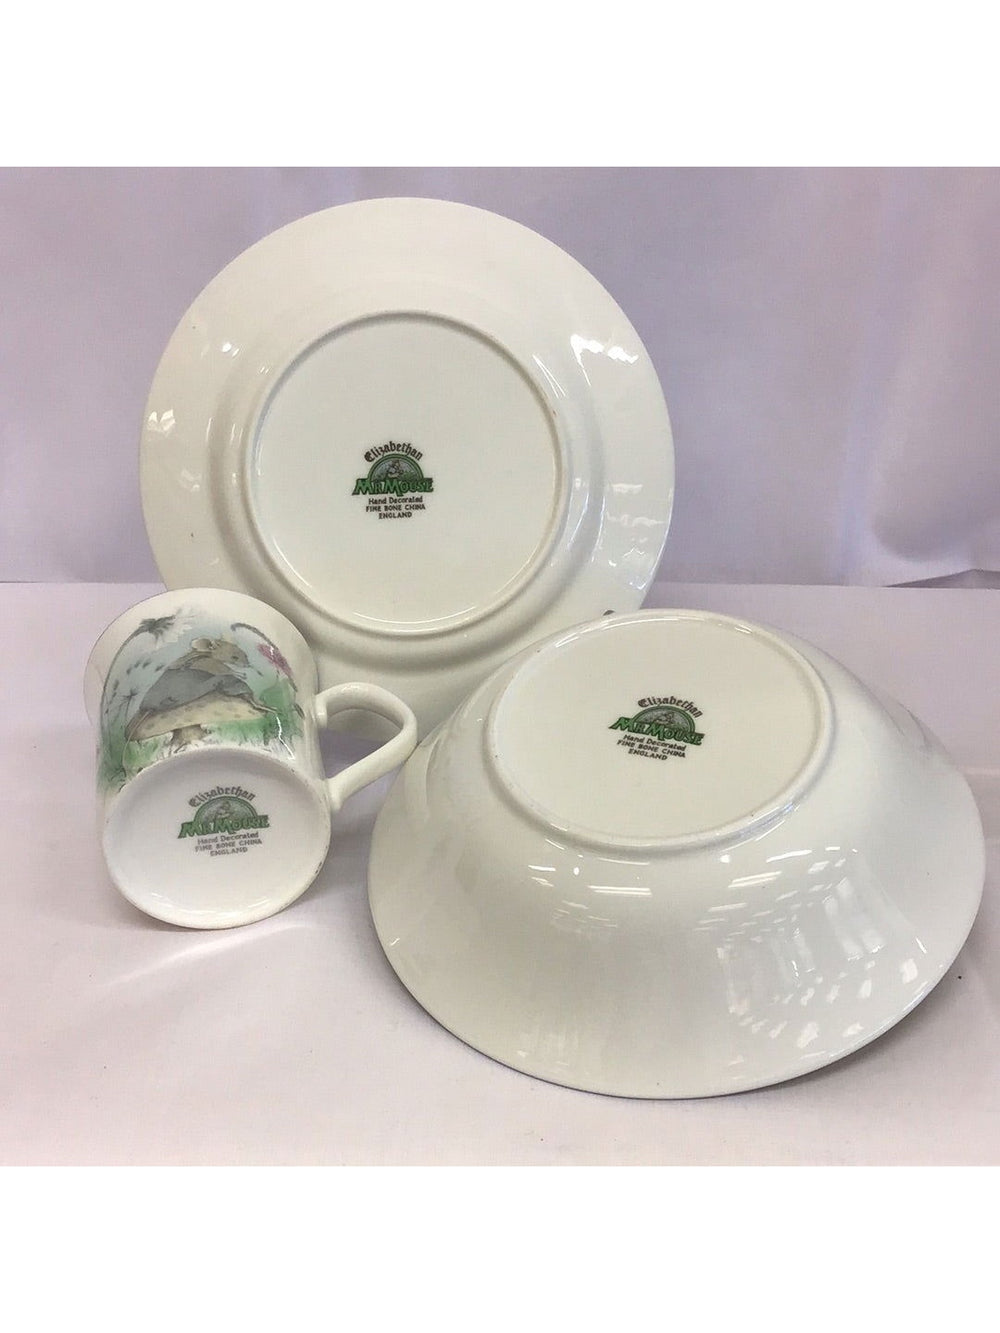 Elizabeth Mr Mouse Child’s 3pc Dinner Set - The Kennedy Collective Thrift - 